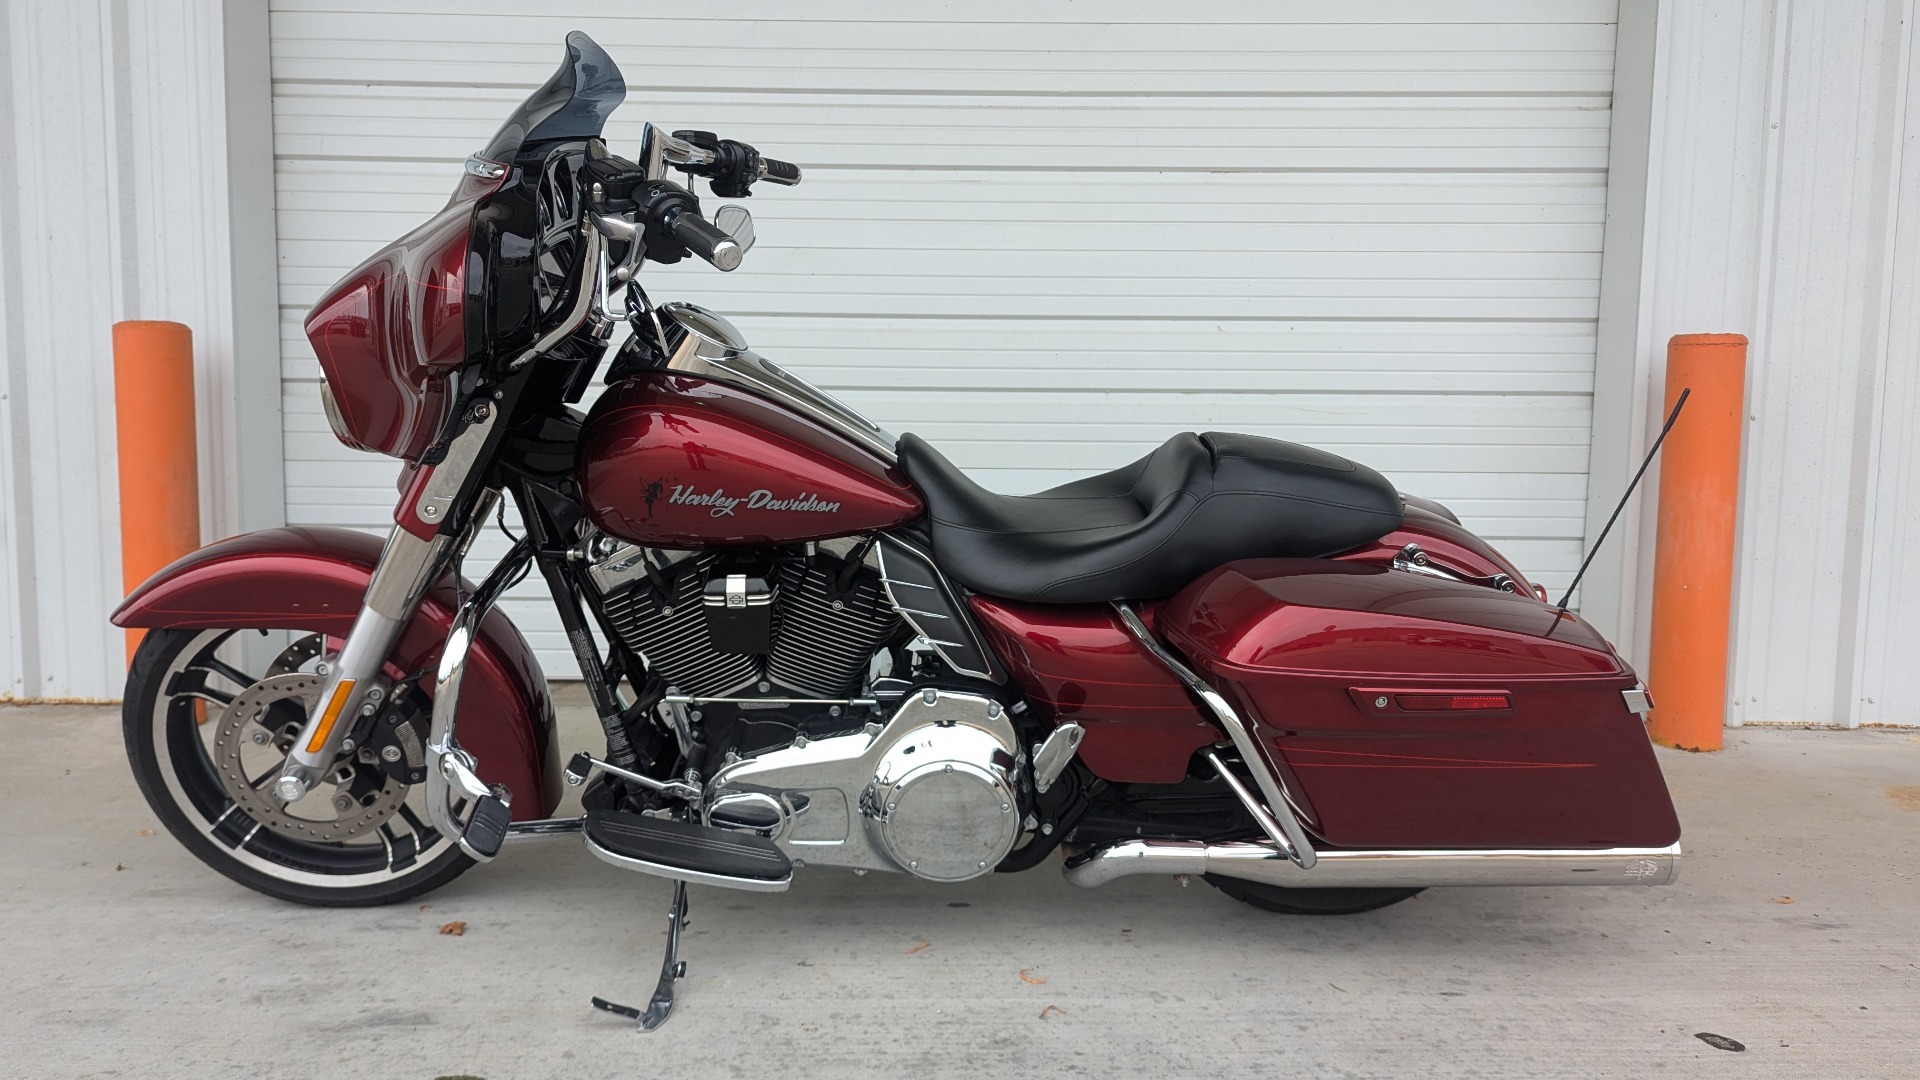 2016 harley davidson street glide special velocity red for sale in louisiana - Photo 2